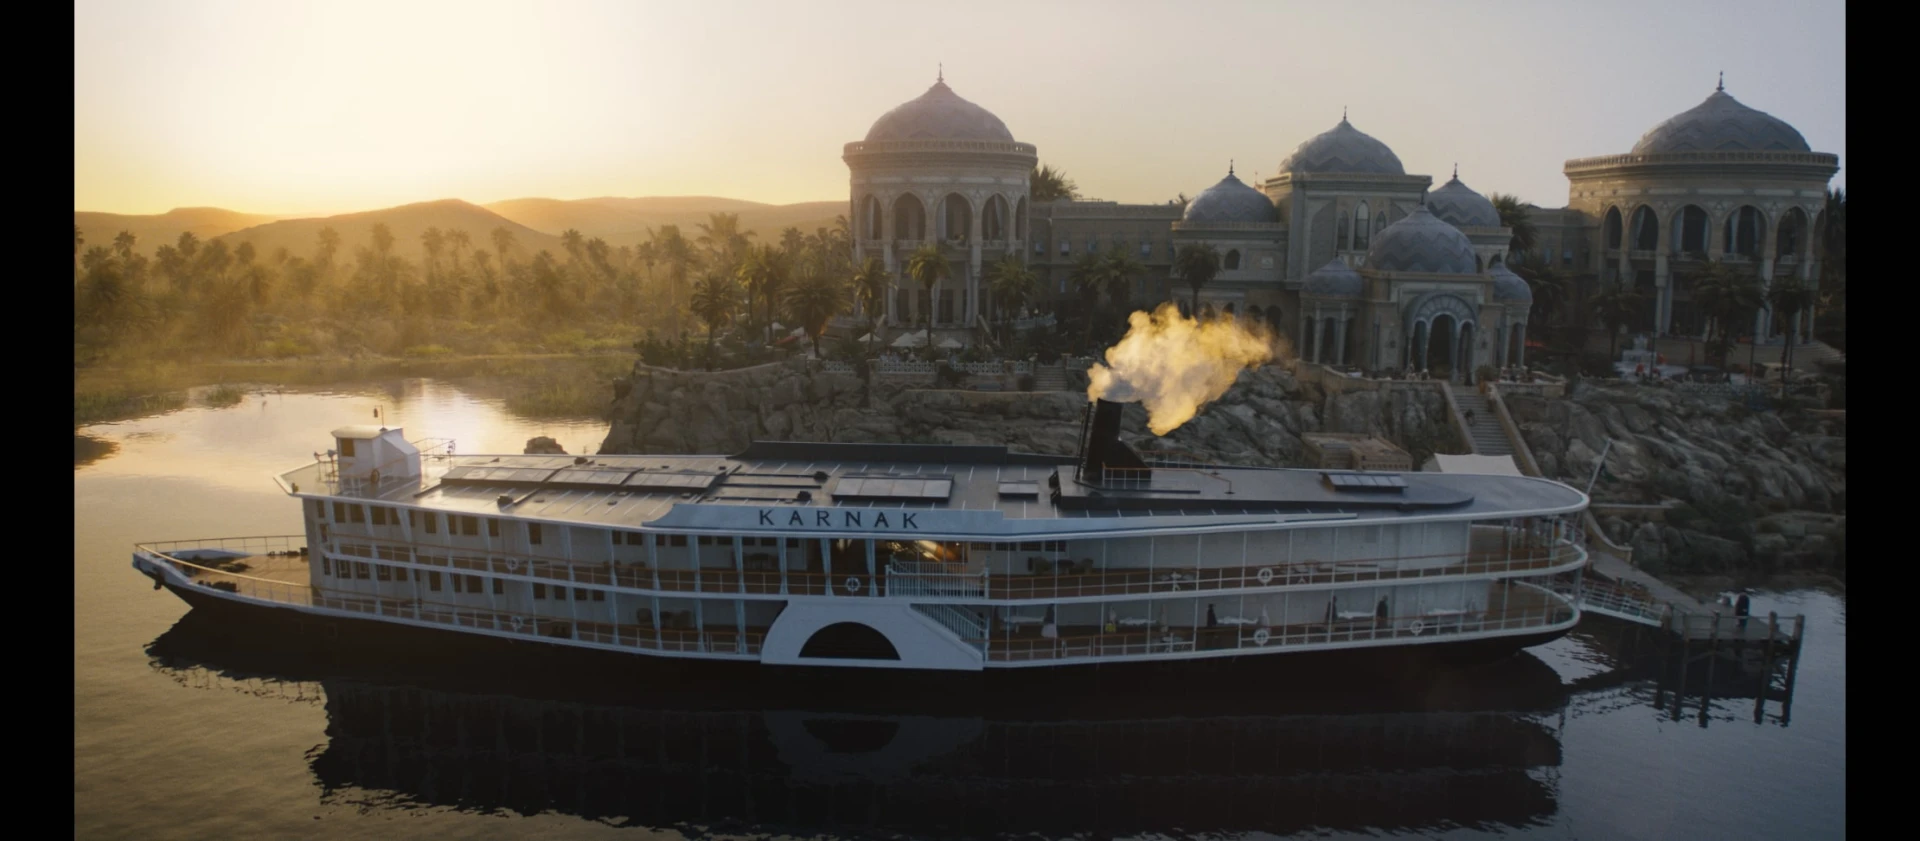 Death on the Nile boat view after Raynault vfx work